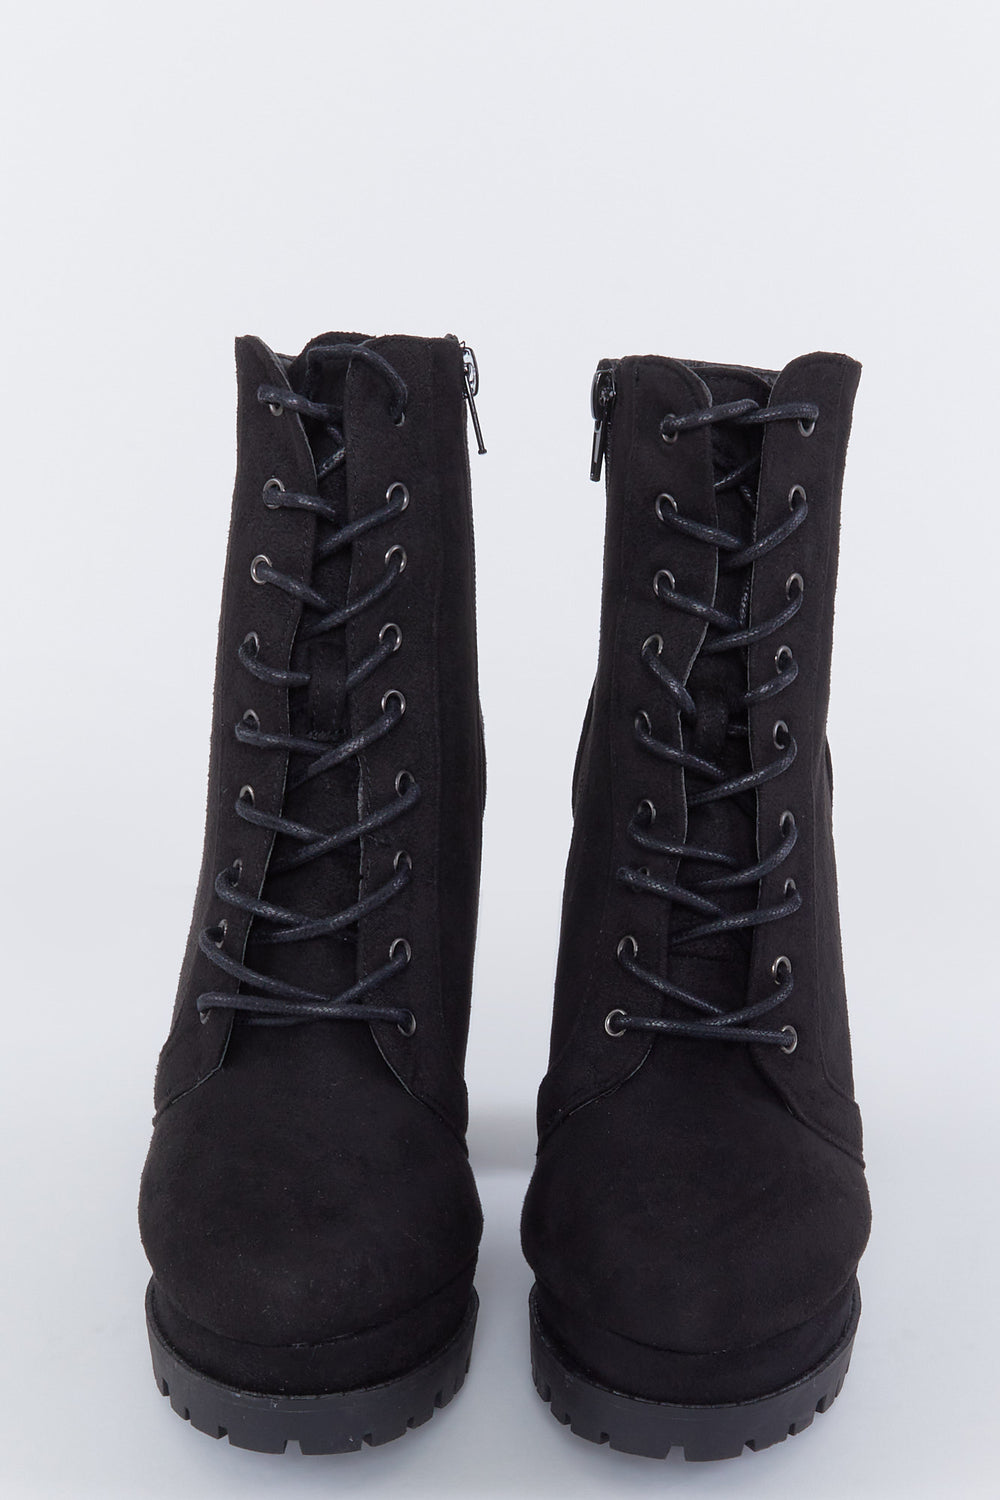 Faux-Suede Lace-Up Lug Sole Block Heel Boot Black